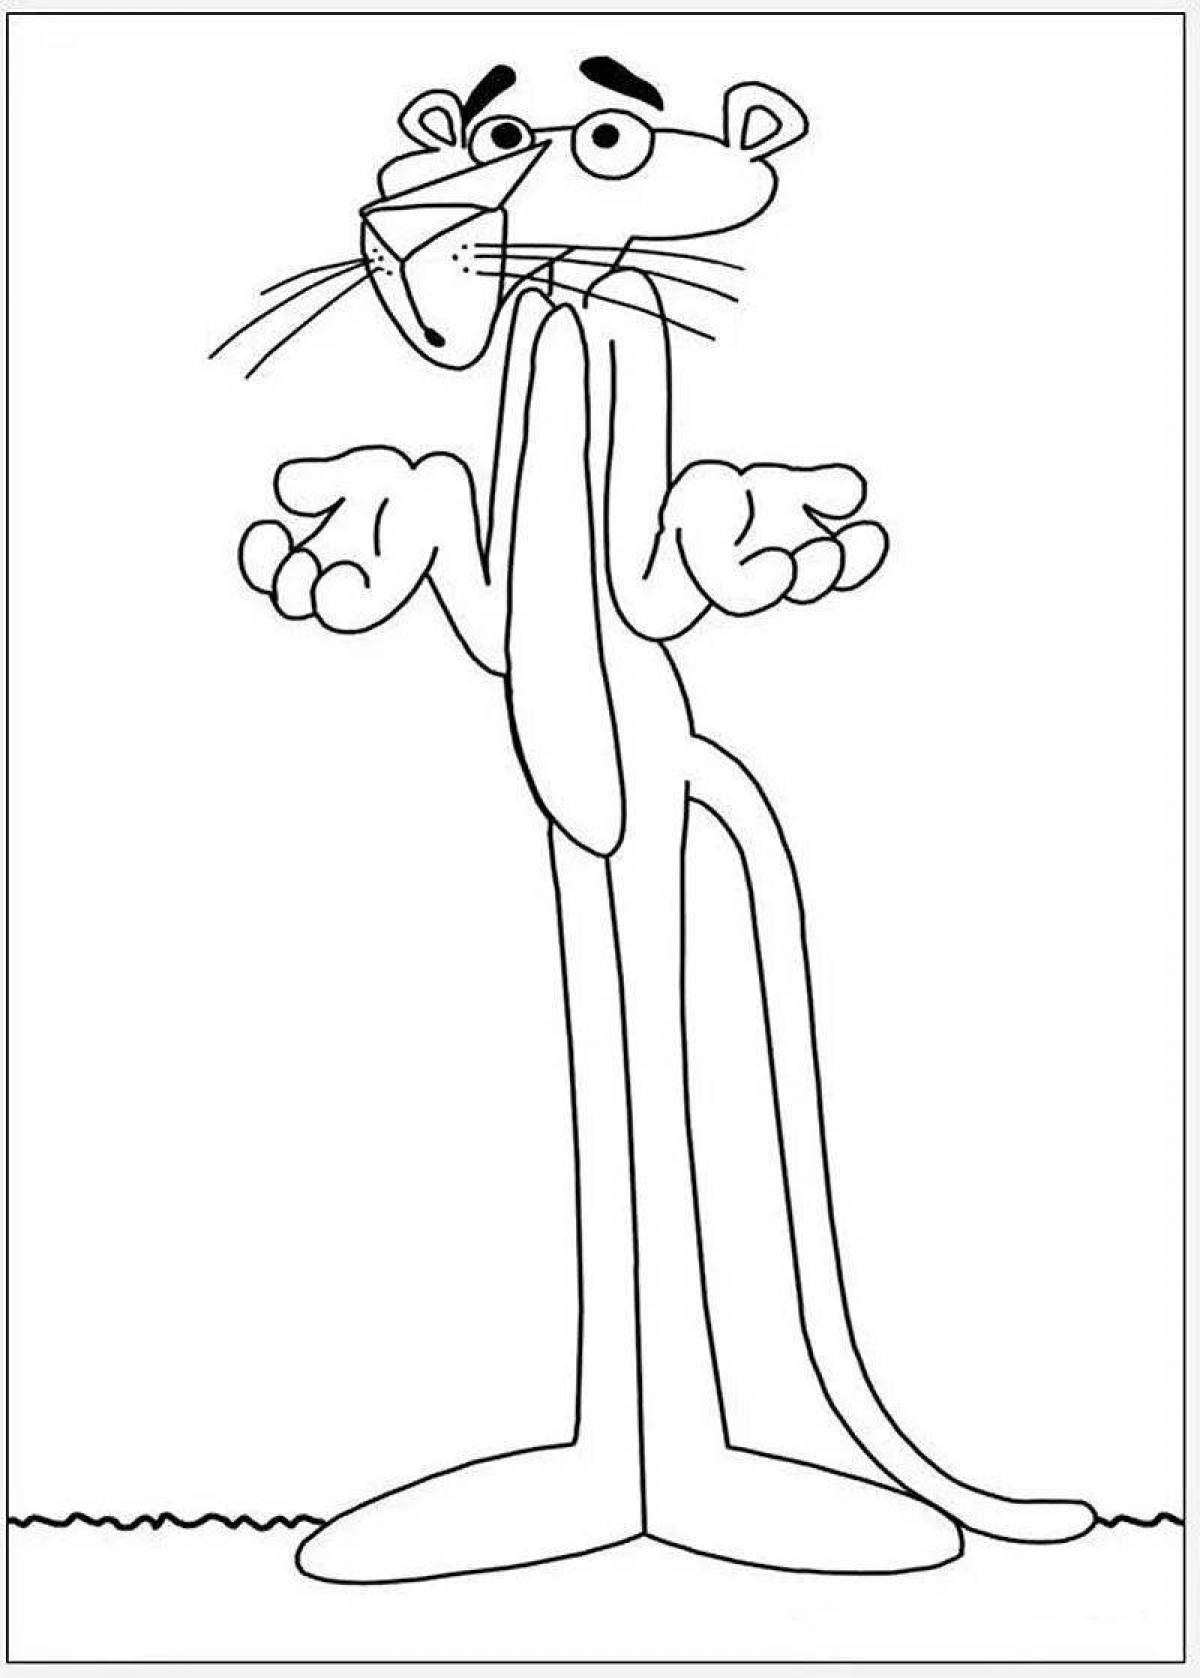 Colorful pink panther coloring page